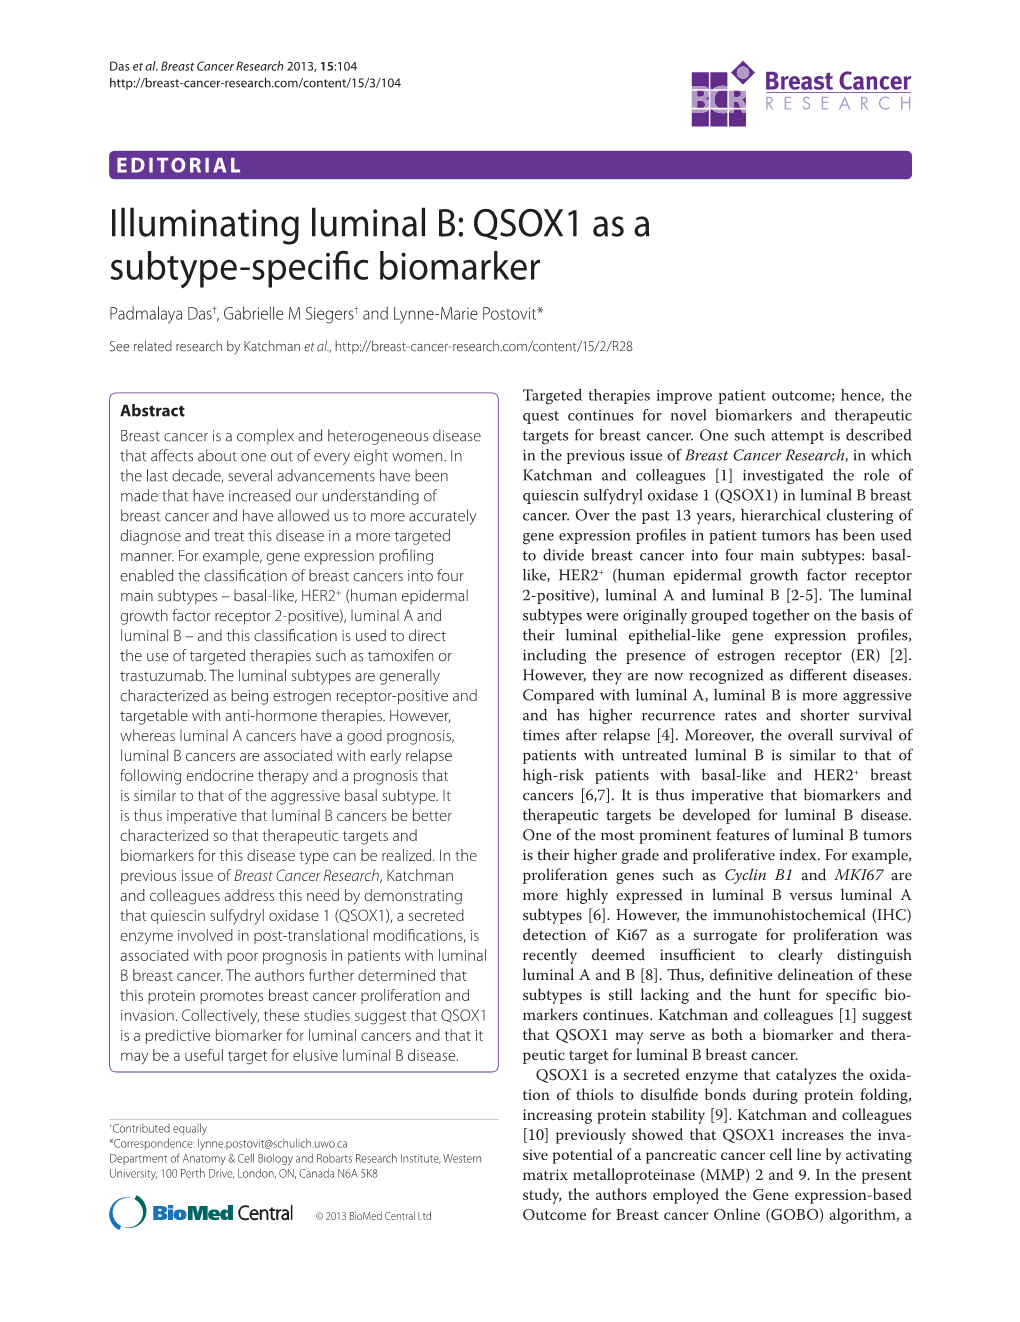 QSOX1 As a Subtype-Specific Biomarker